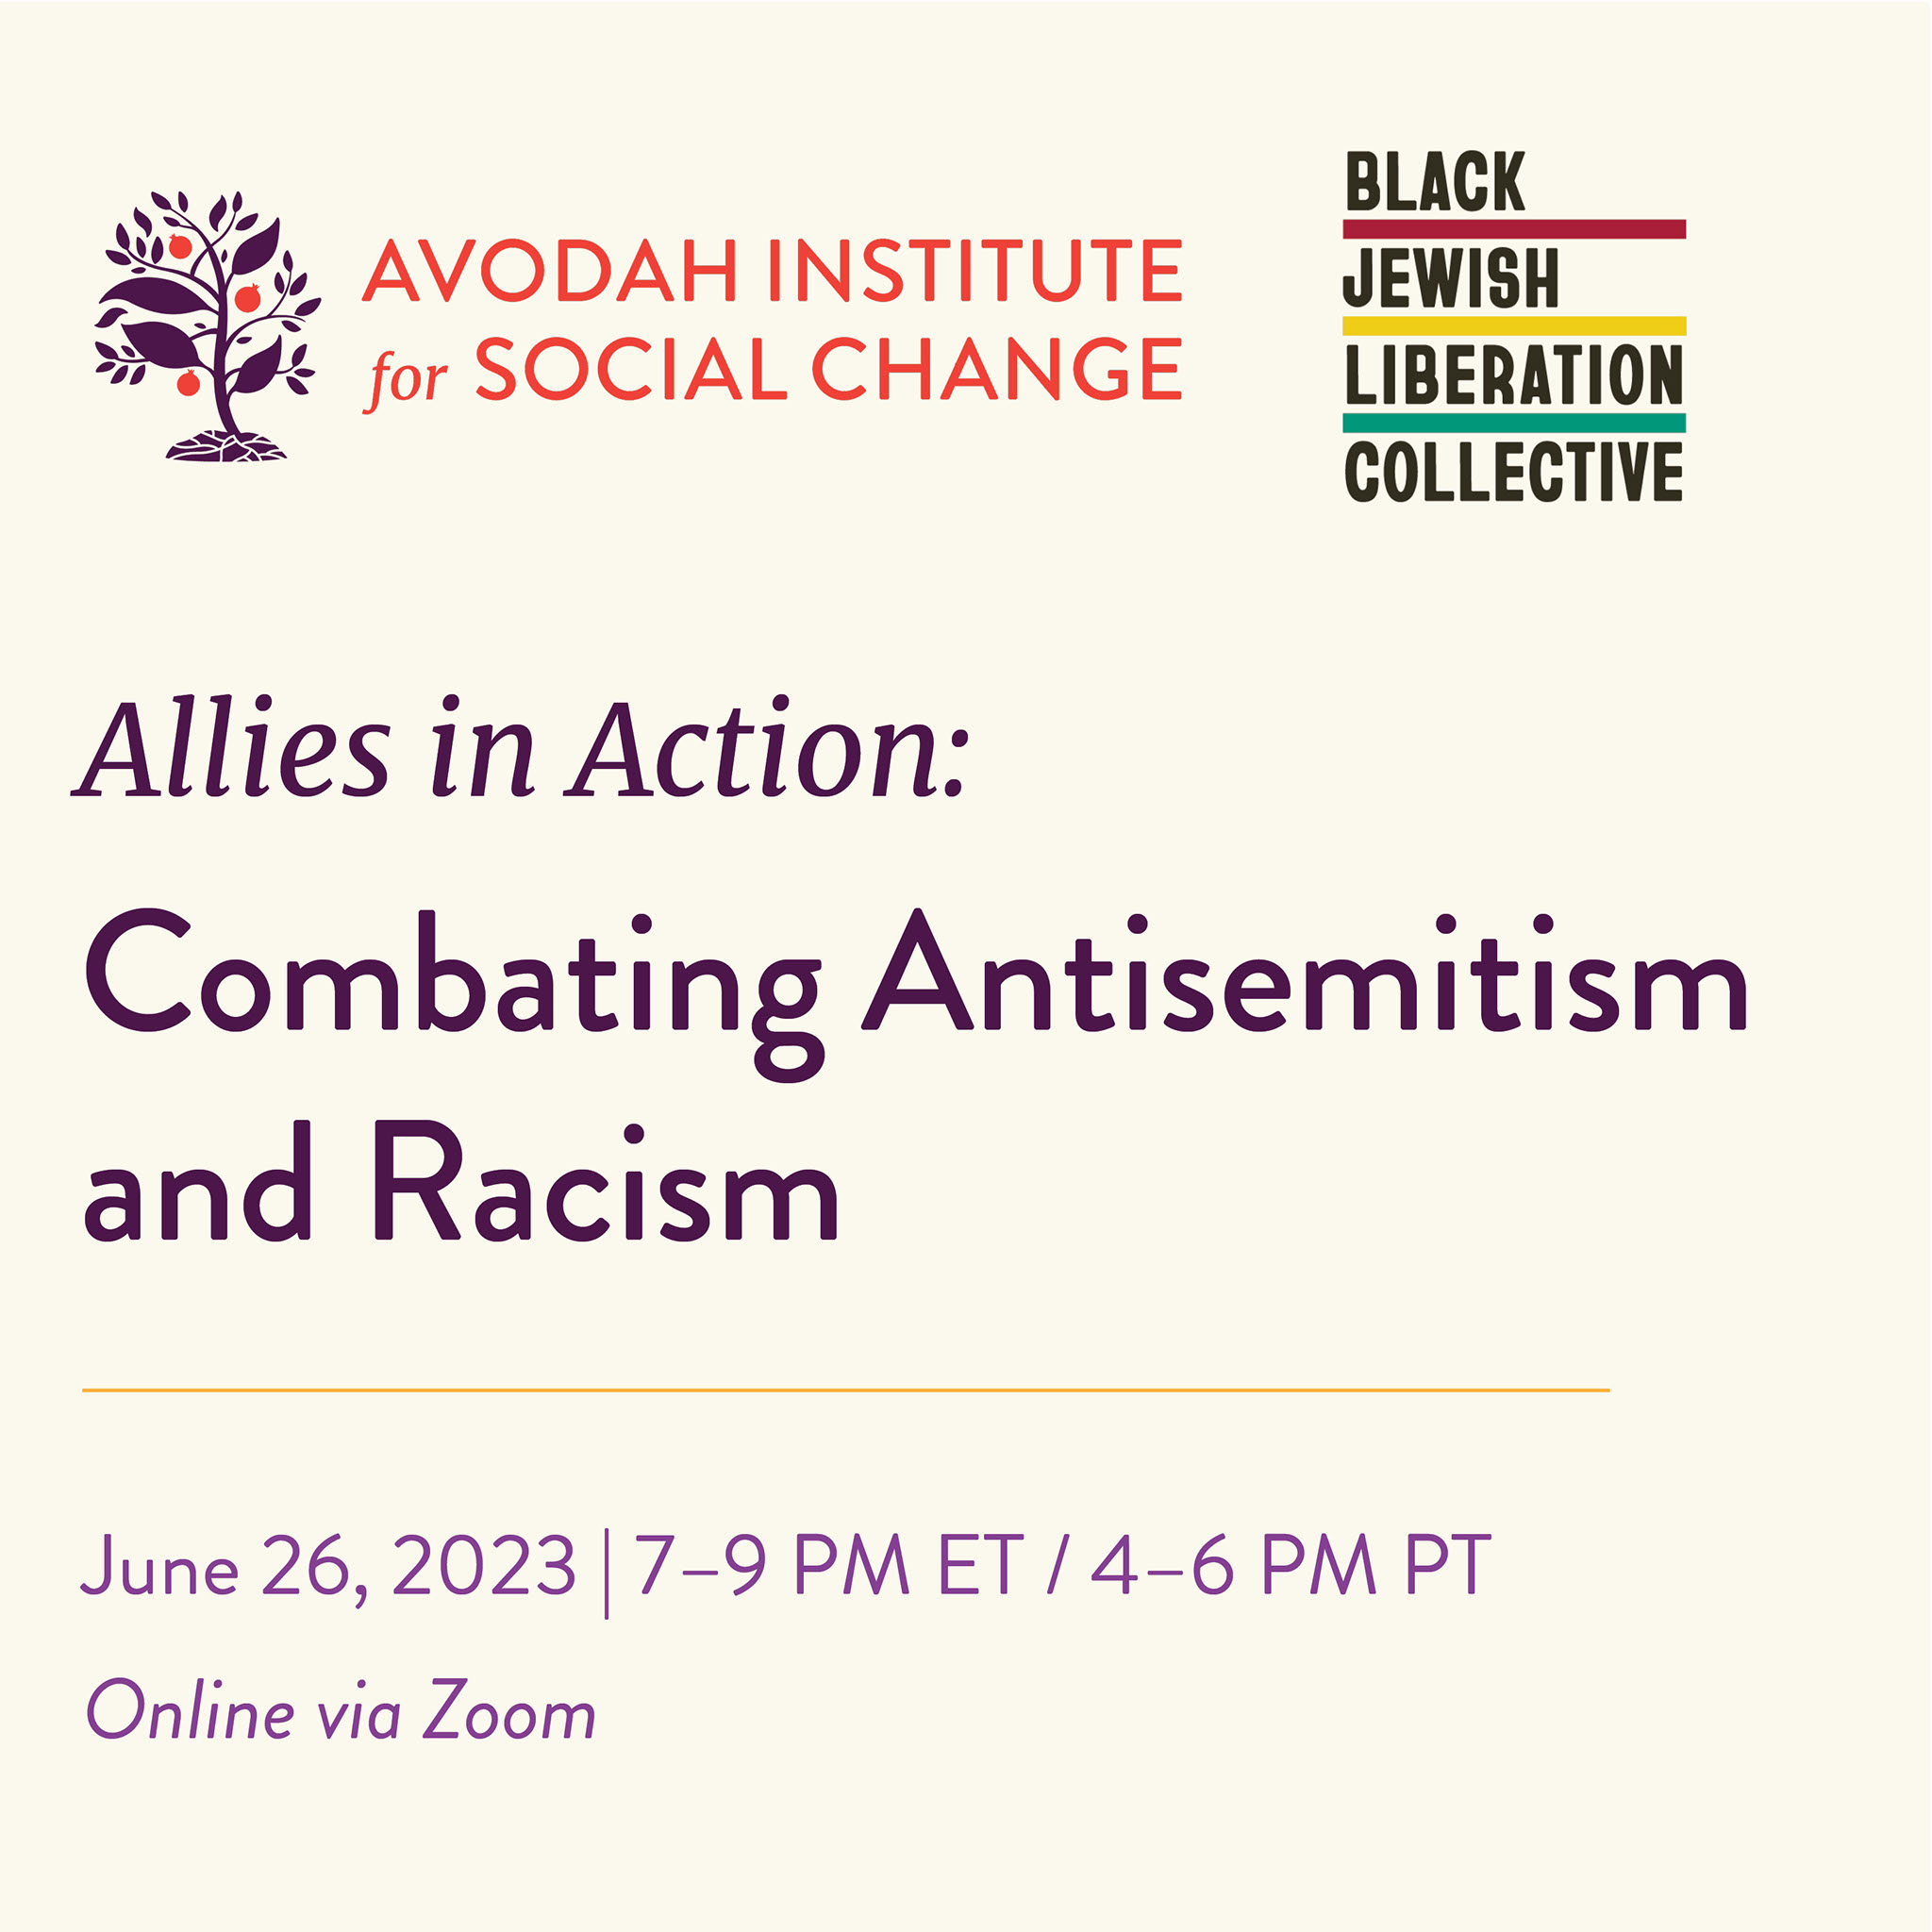 This virtual learning session convened by the Avodah Institute for Social Change in partnership with the Black Jewish Liberation Collective will focus on how to shift away from isolation and towards community building, and share how addressing antisemitism is a key part of the movement for racial justice. Come learn how we can overcome this moment of fear through inspiring conversation from leaders in the field. Taking place on Monday, June 26 from 7-9 p.m. ET, this free event will feature an opening panel and breakout rooms on the following topics: how to talk about antisemitism with your non-Jewish neighbors; how to have intergenerational conversations about antisemitism; and how to teach about antisemitism to Jewish teens.